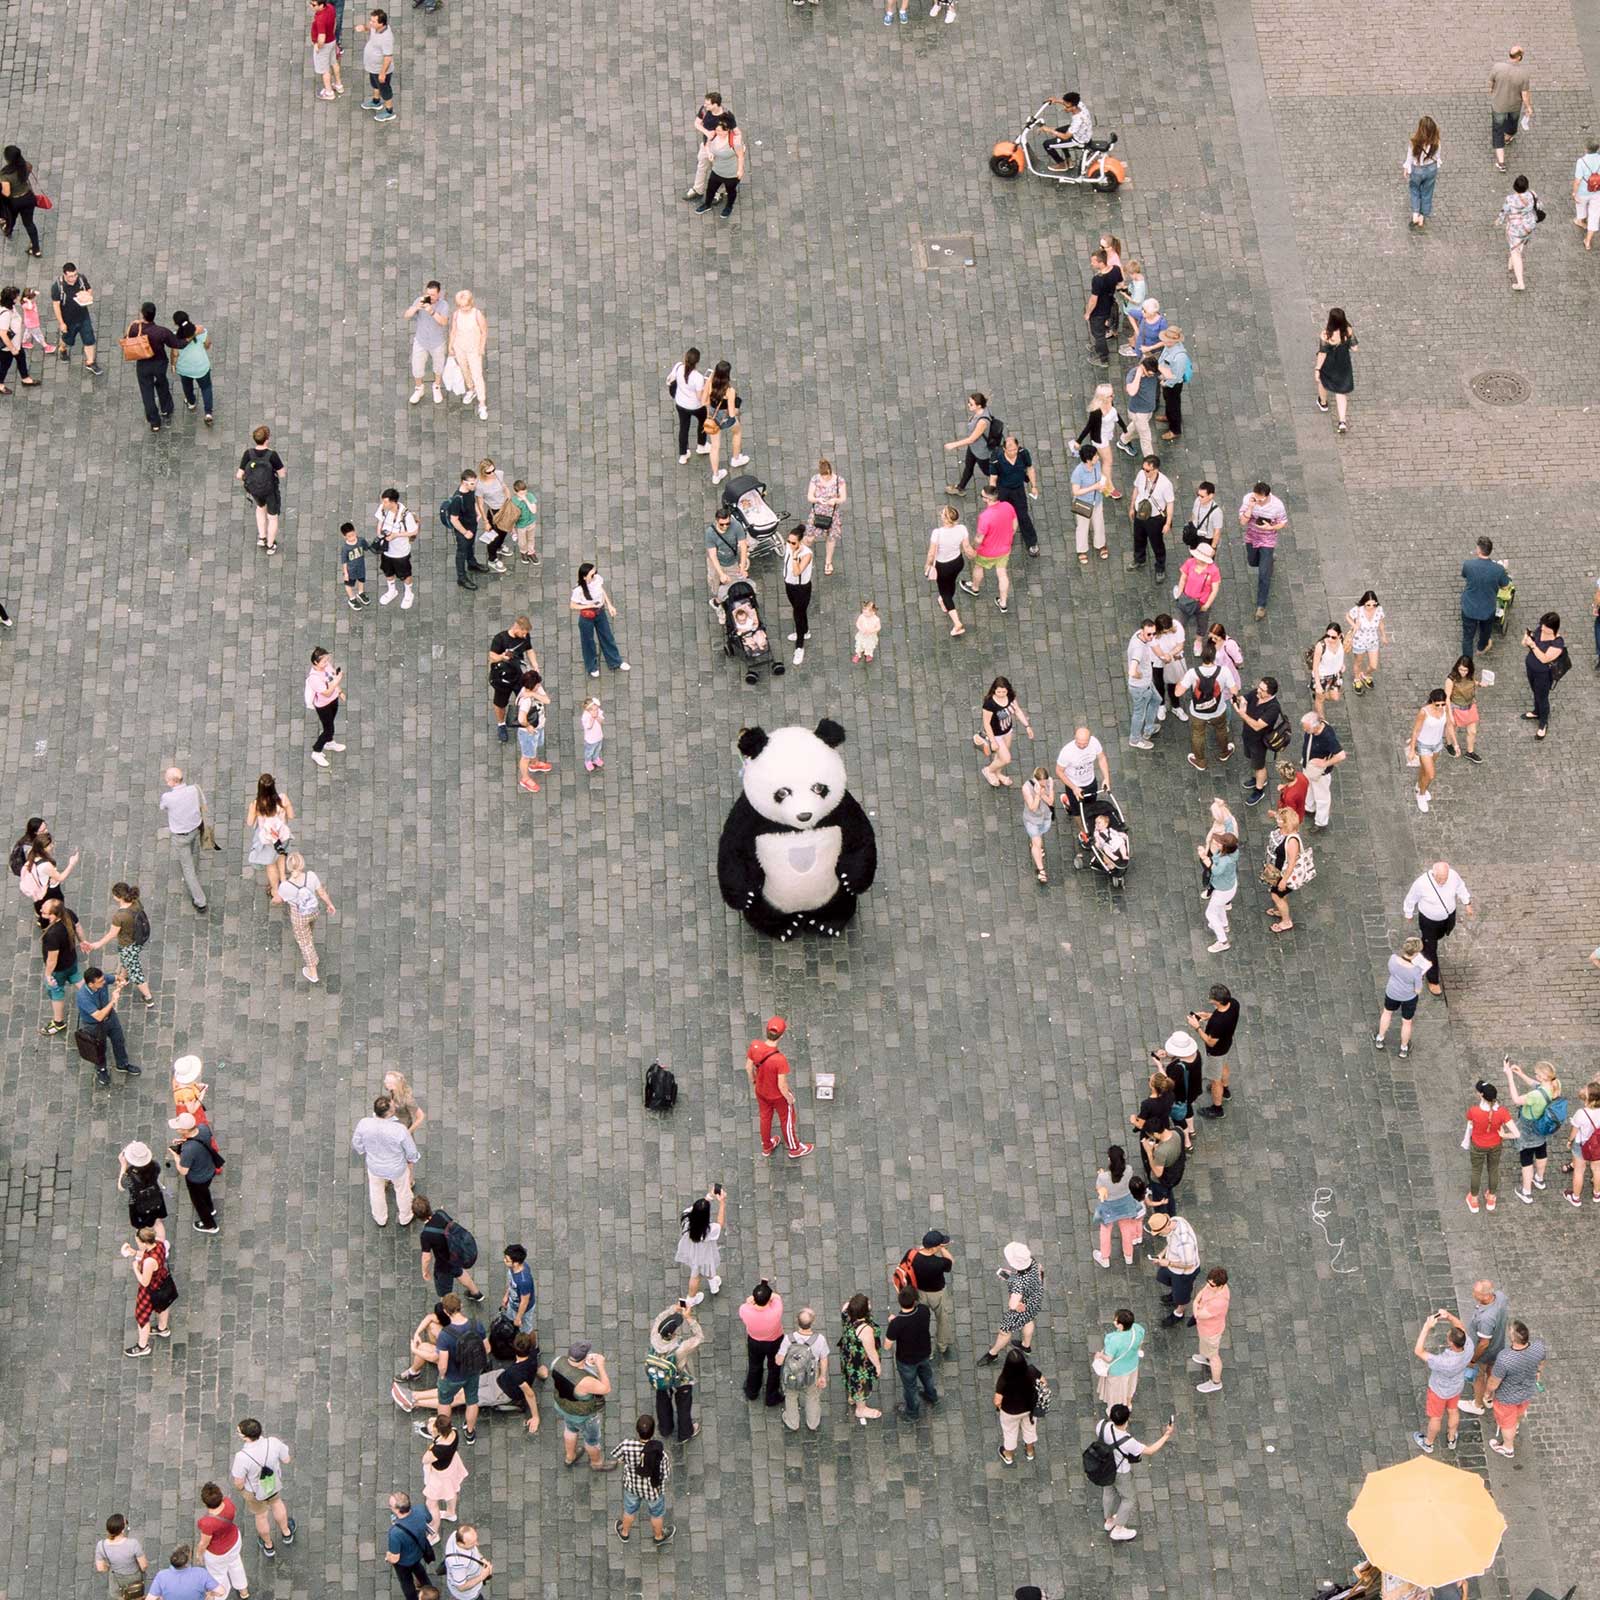 Top down view of a busy crowd surrounding a large model of a panda bear